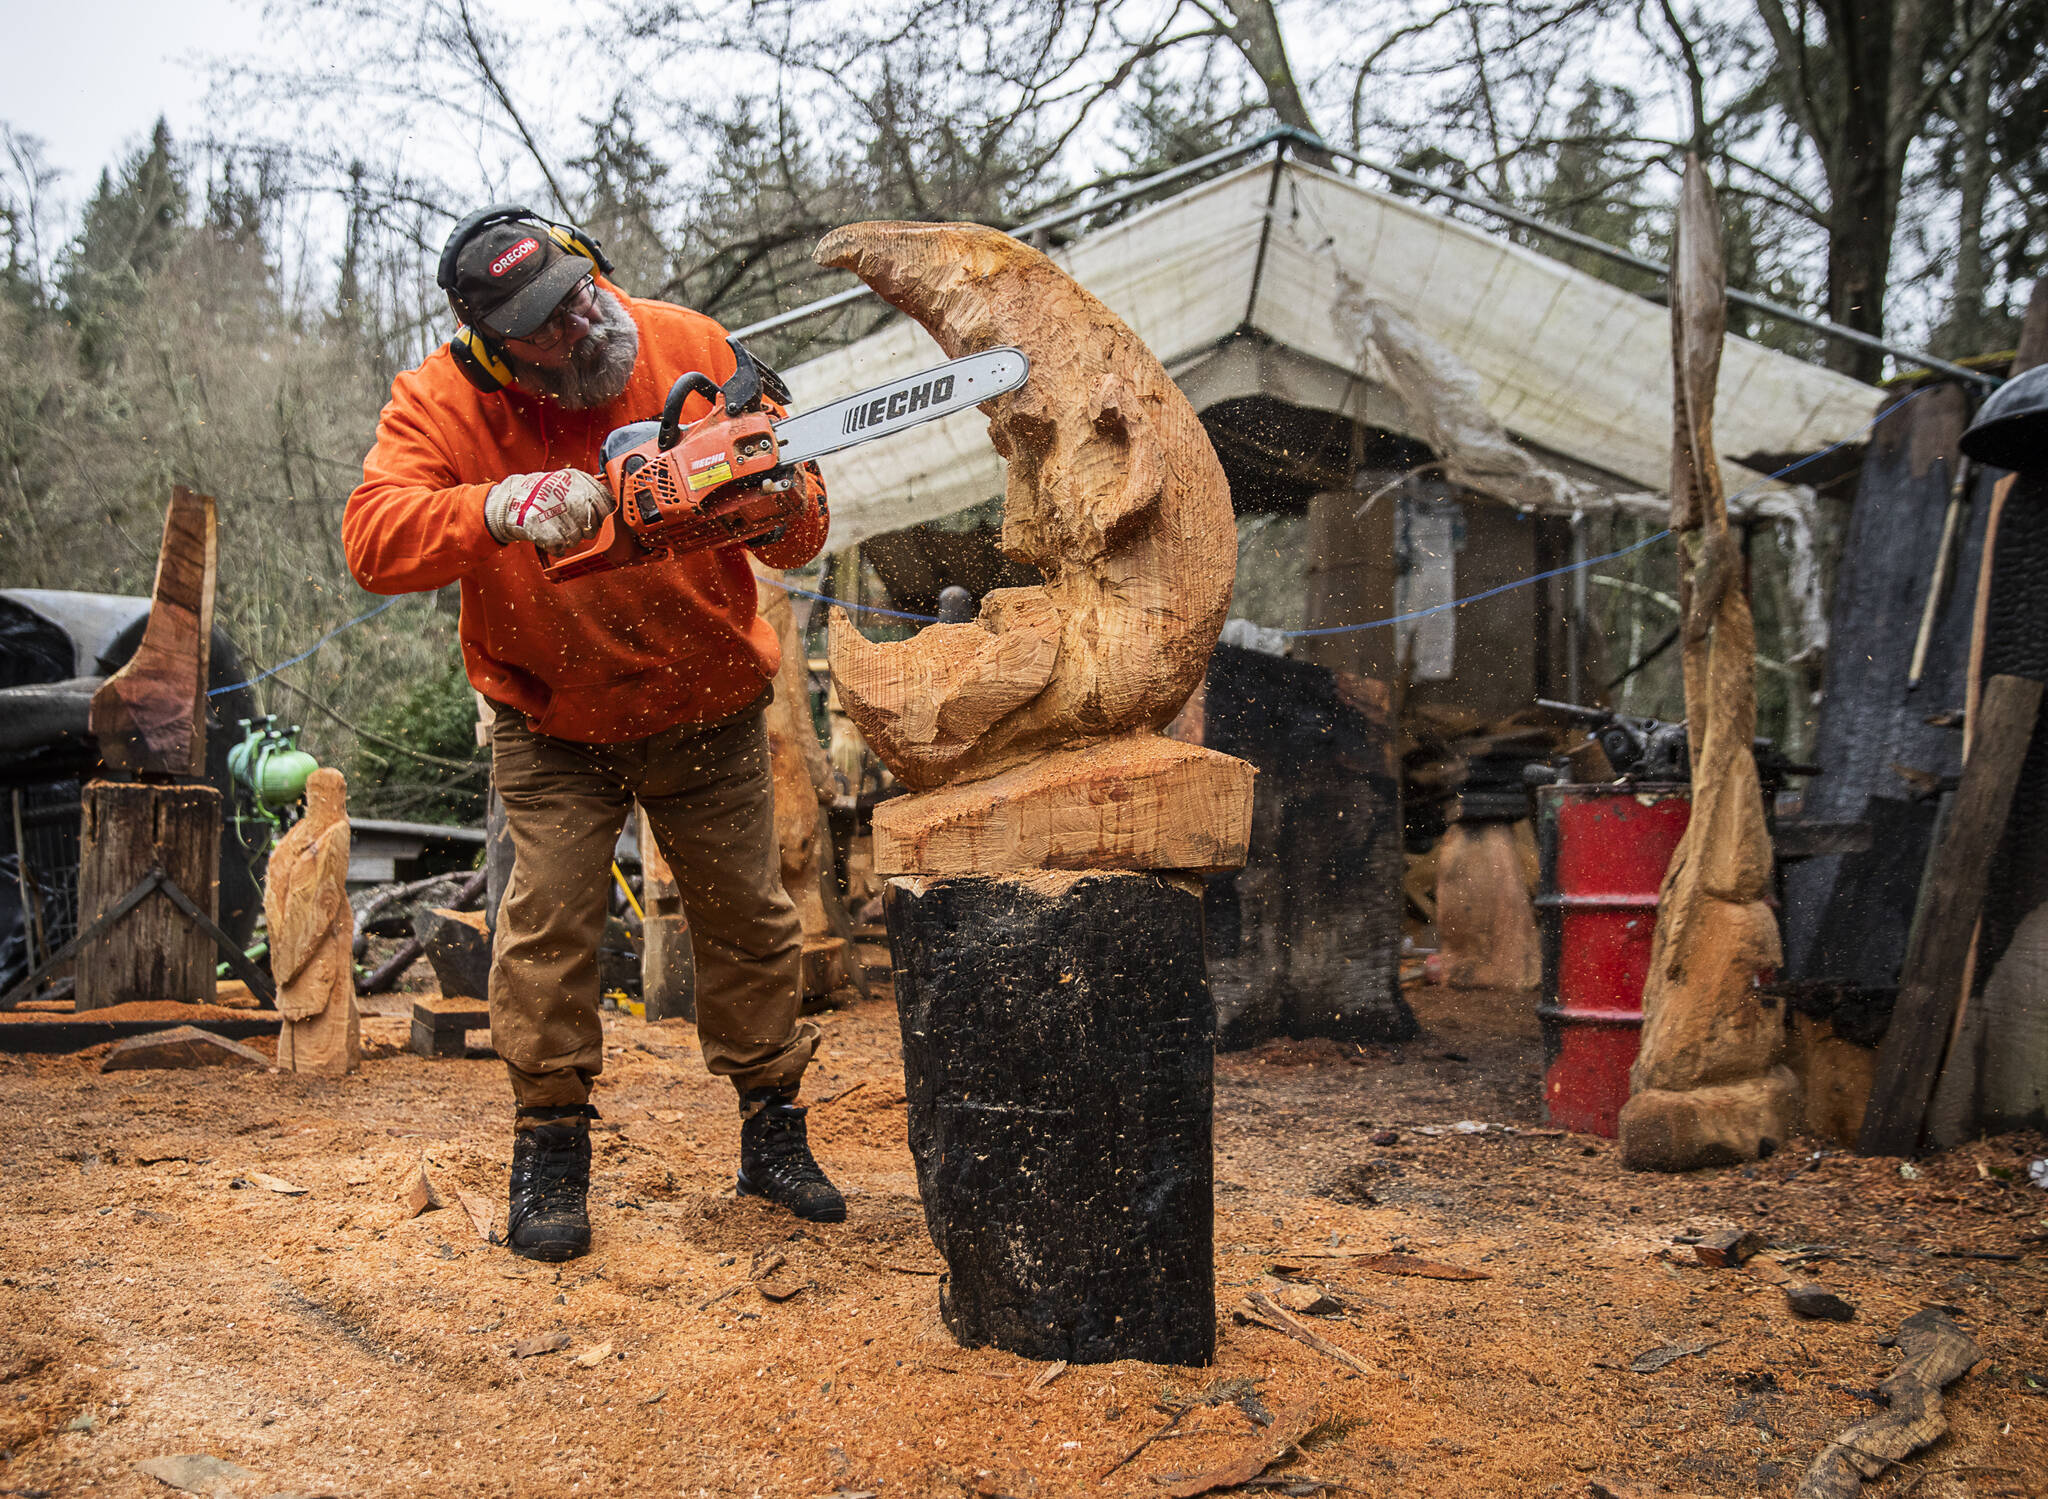 Olivia Vanni / The Herald
Steve Backus works on the details of a moon carving at his outdoor workshop in Clinton. A Dec. 2 fire destroyed his studio in the former sawmill on the 4-acre Glendale Road property that houses his Big Shot Woodcarving business and home.